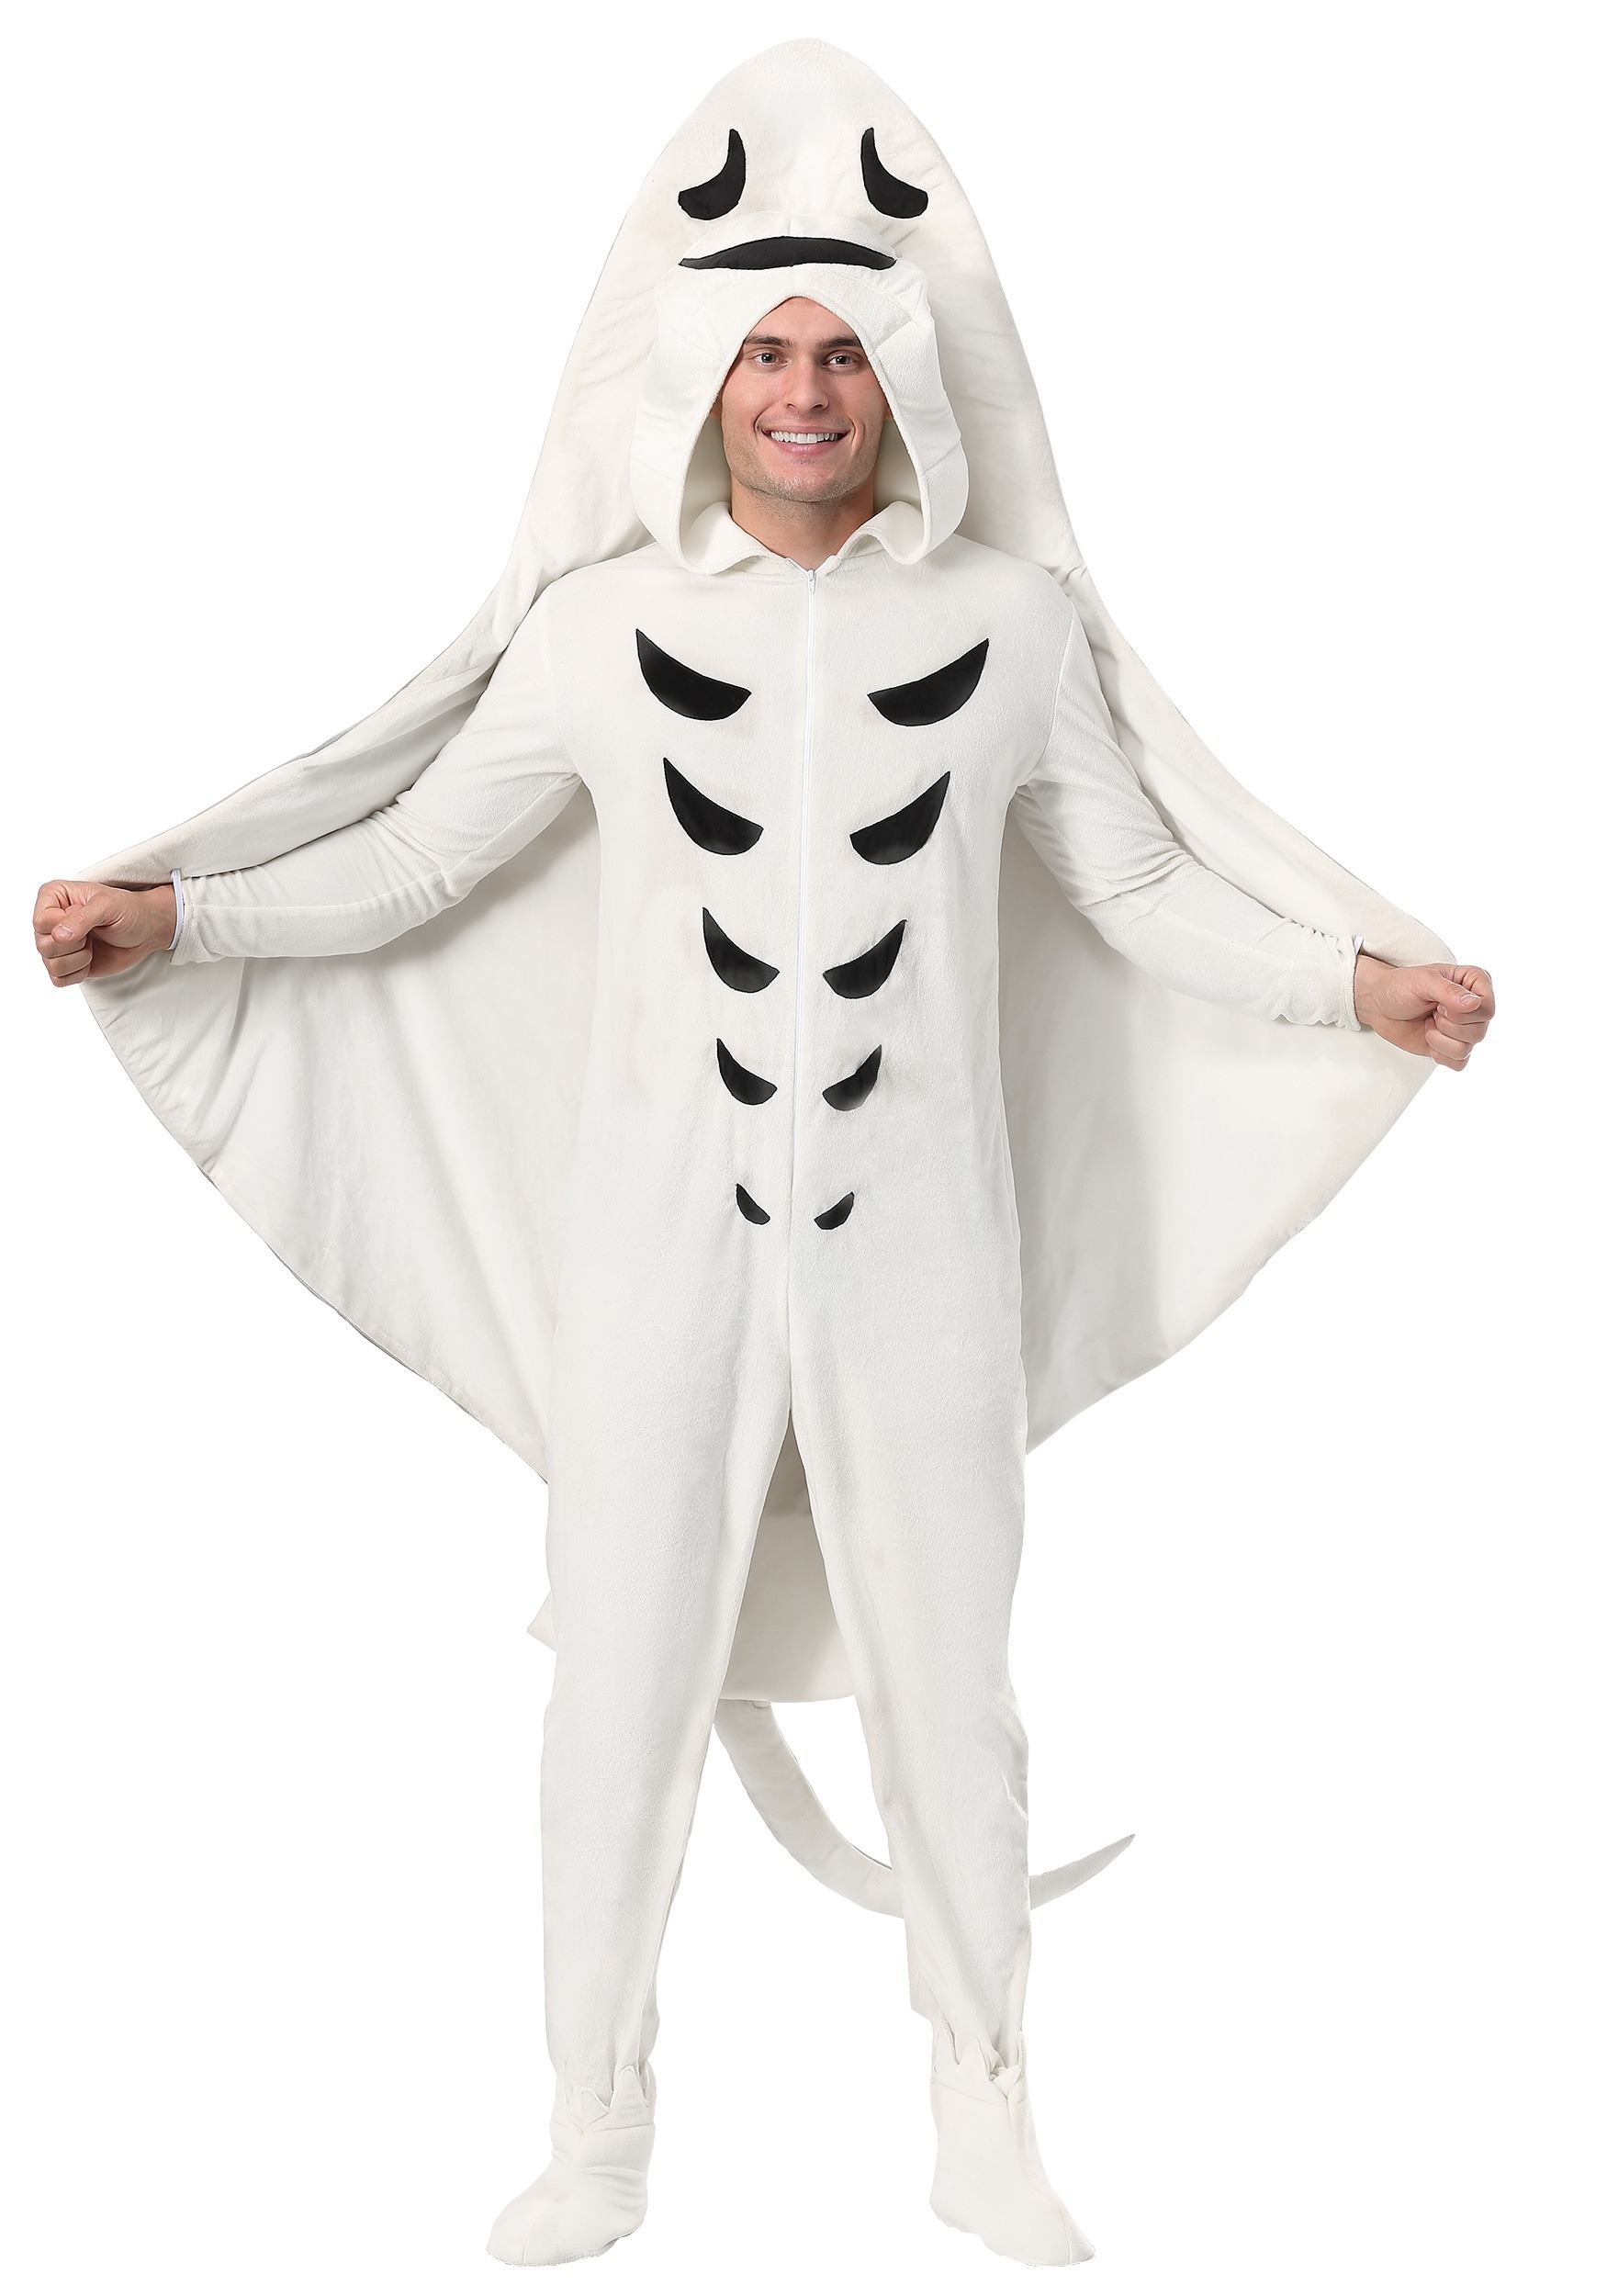 Photos - Fancy Dress Sting FUN Costumes  Ray Costume for Adults White/Gray 